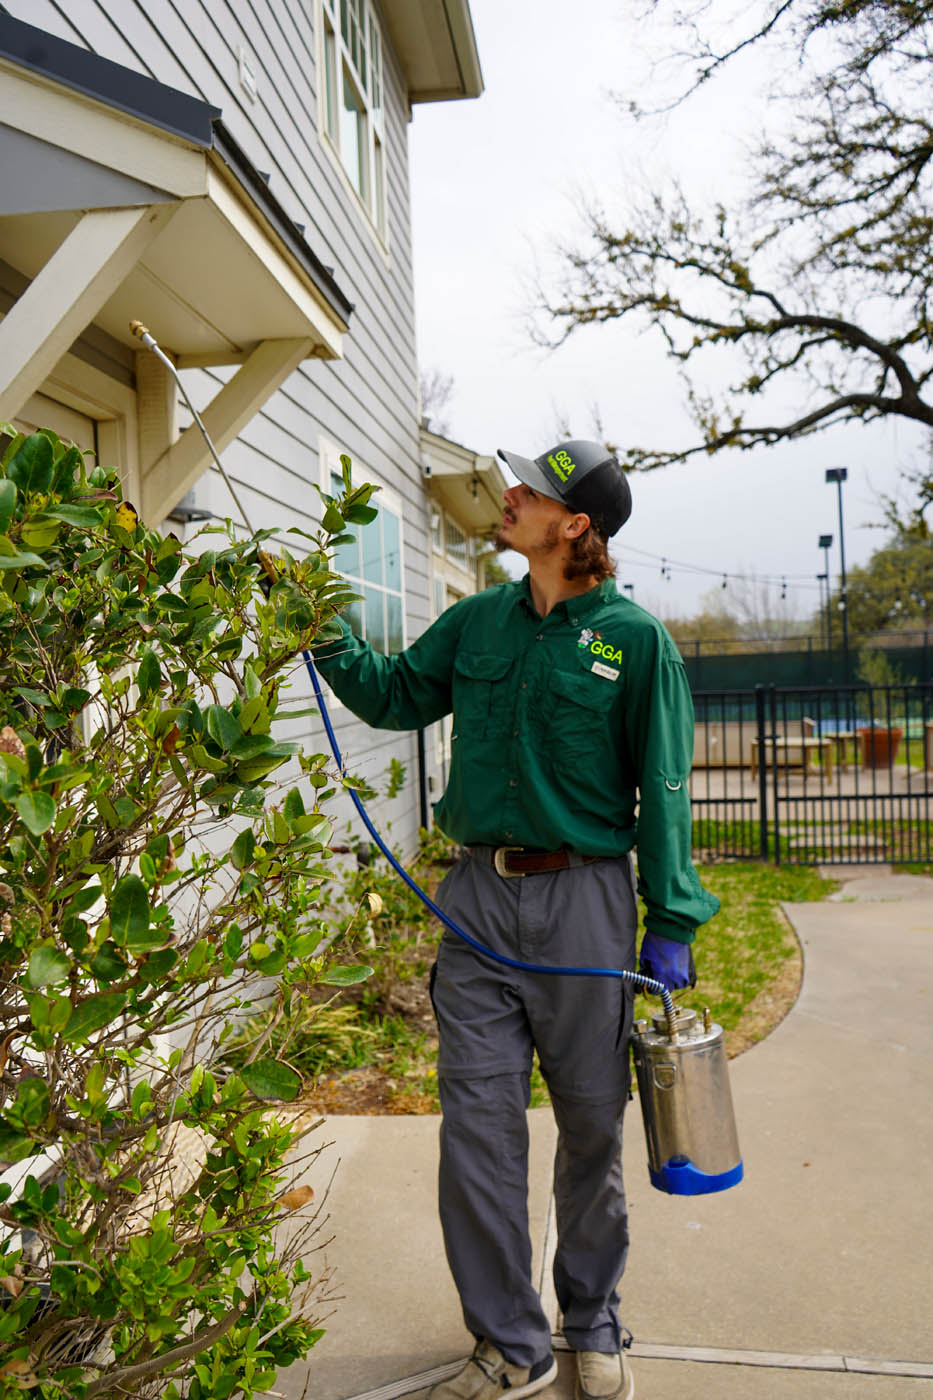 A GGA Pest Management employee working on residential home - choose GGA Pest Management for the best Temple exterminator pest control services.